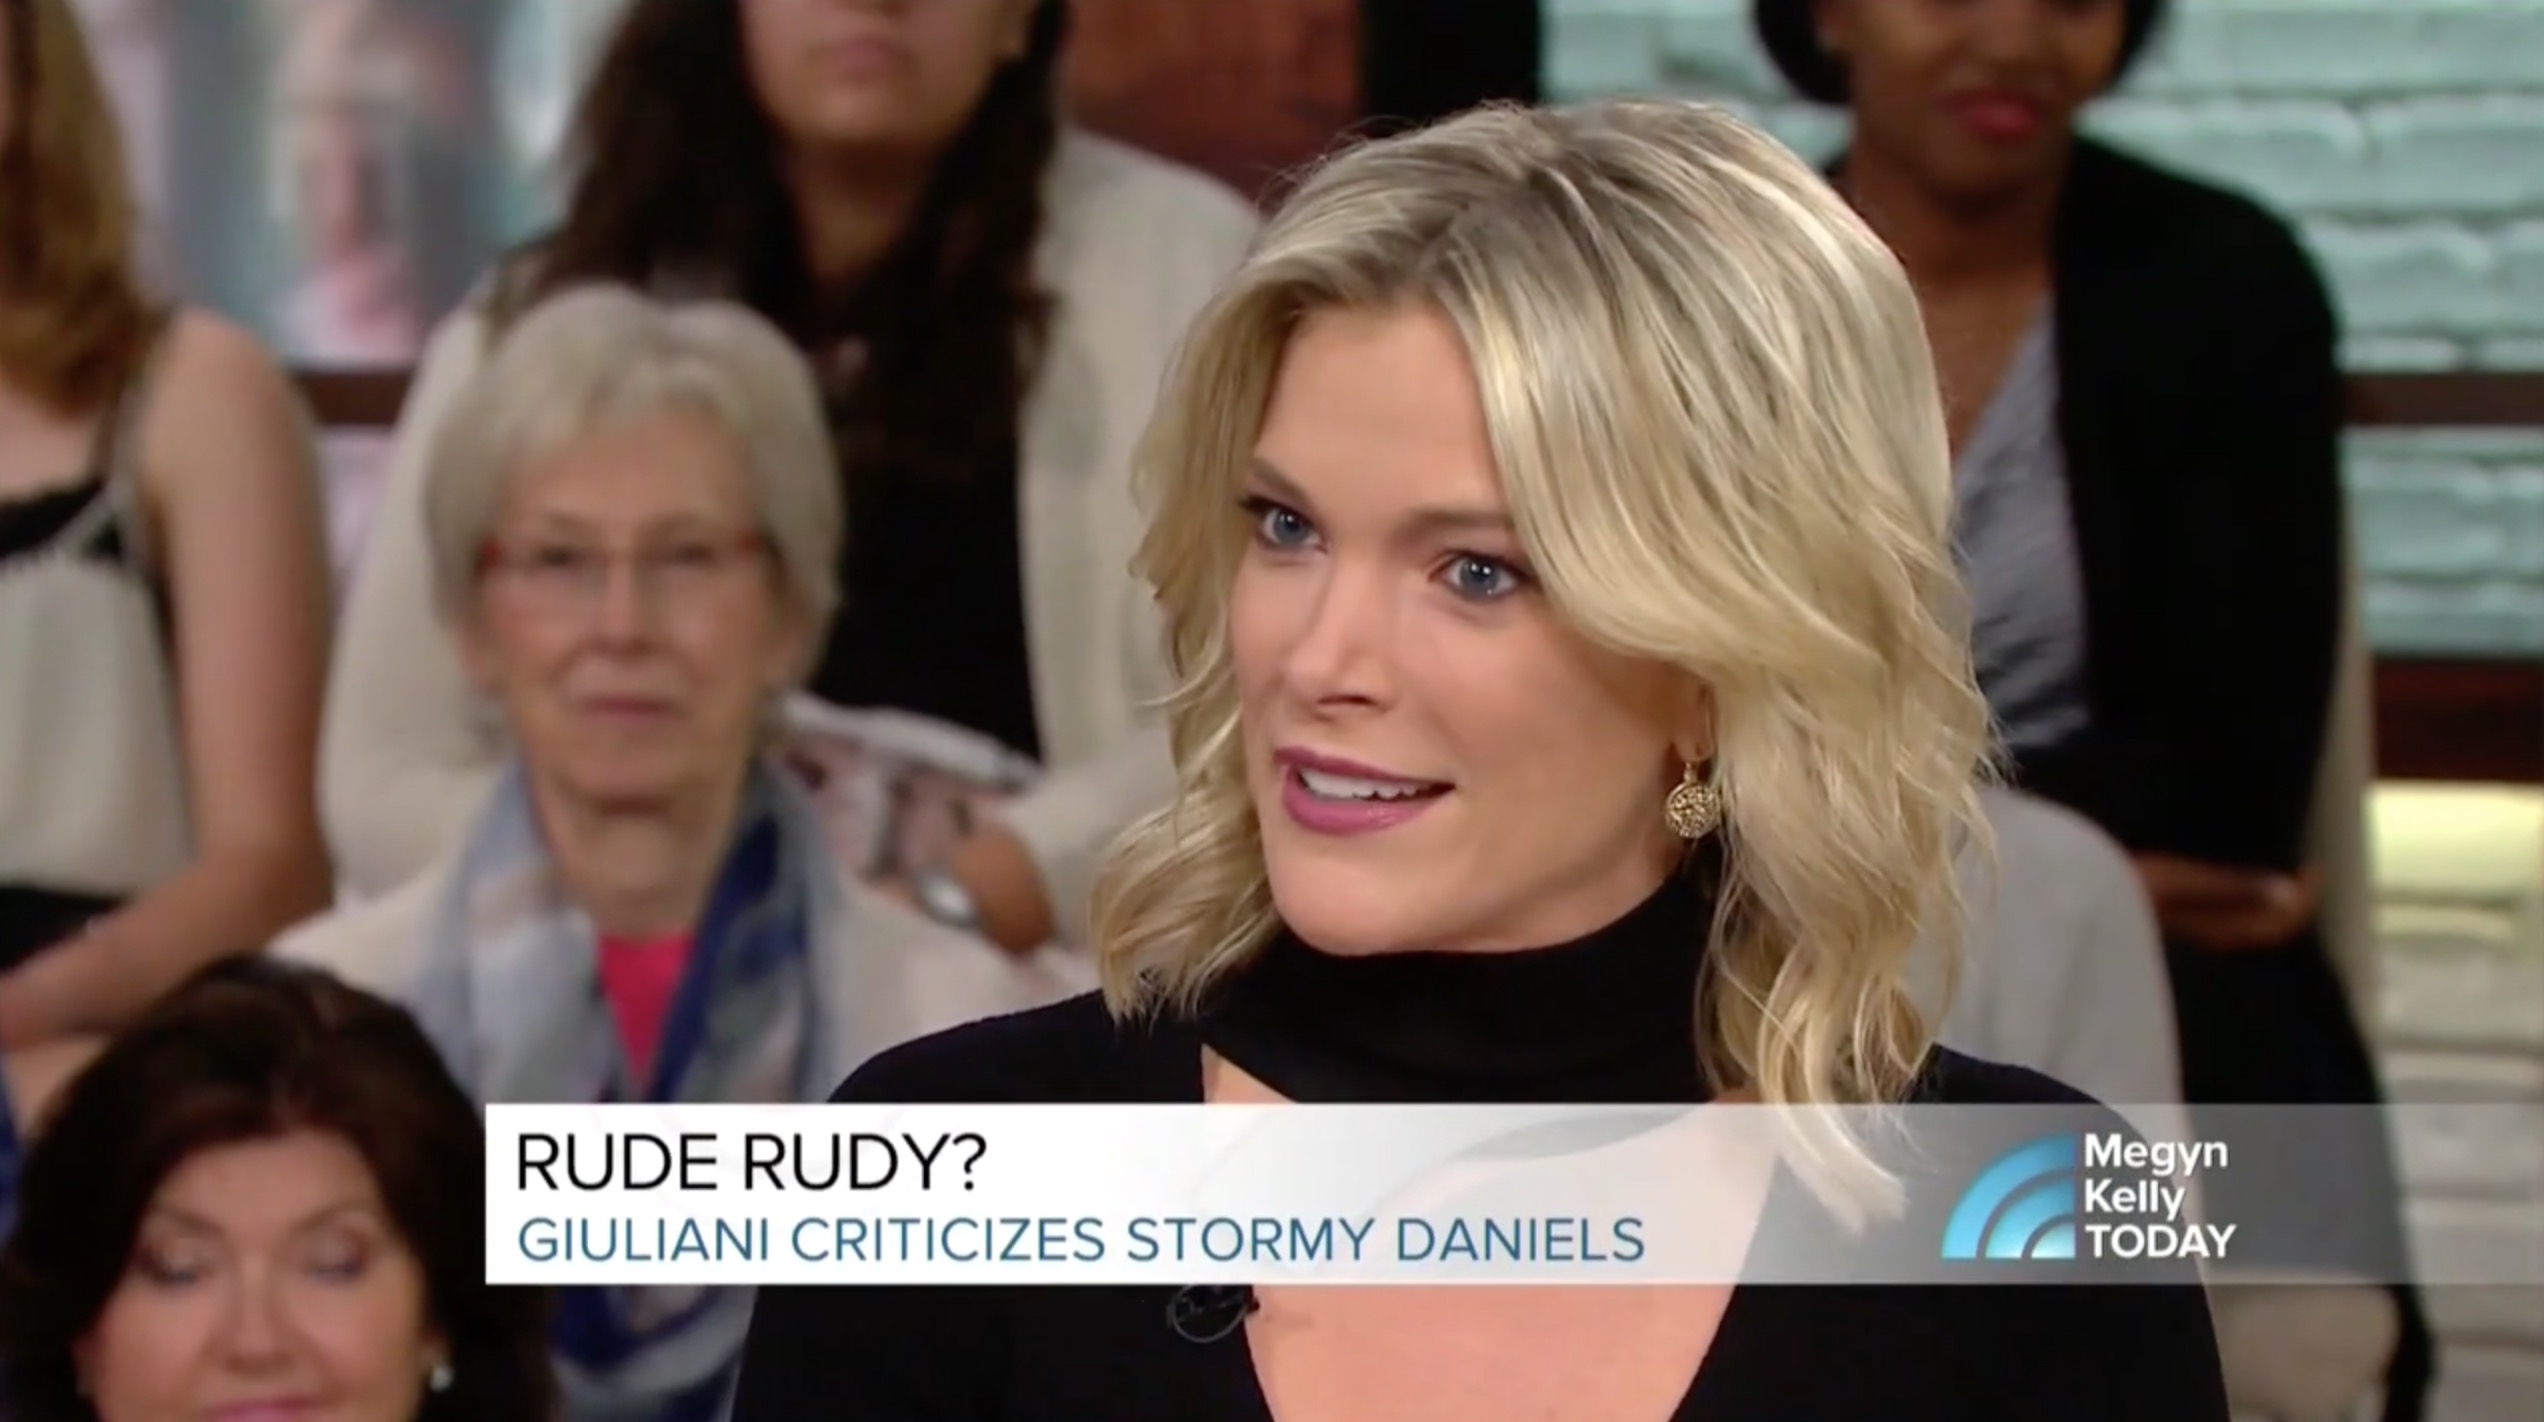 dawn morden recommends megyn kelly nudography pic